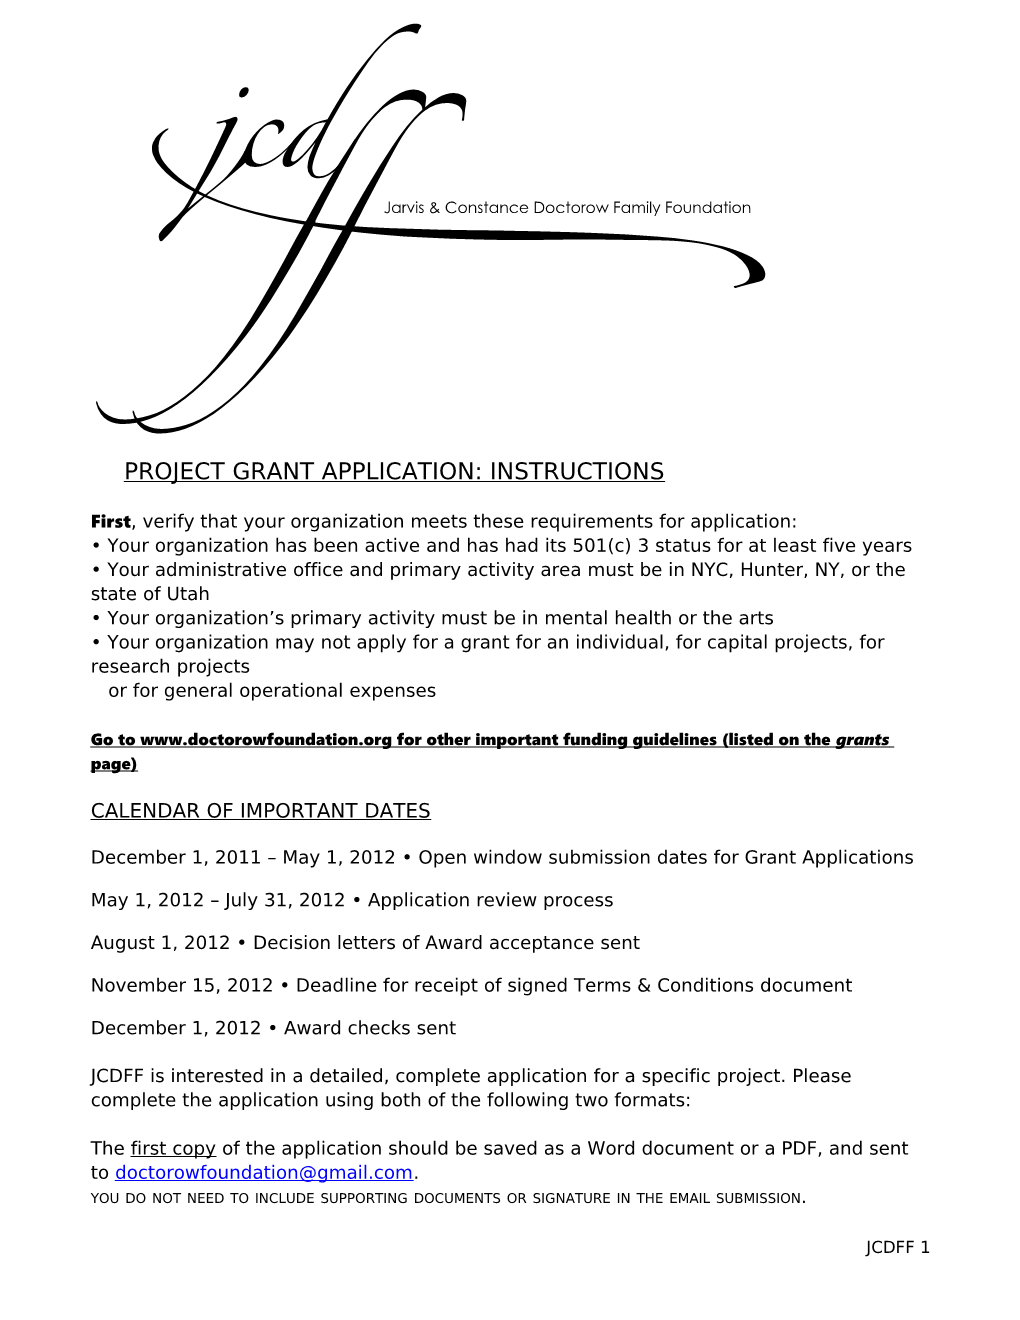 Project Grant Application: Instructions